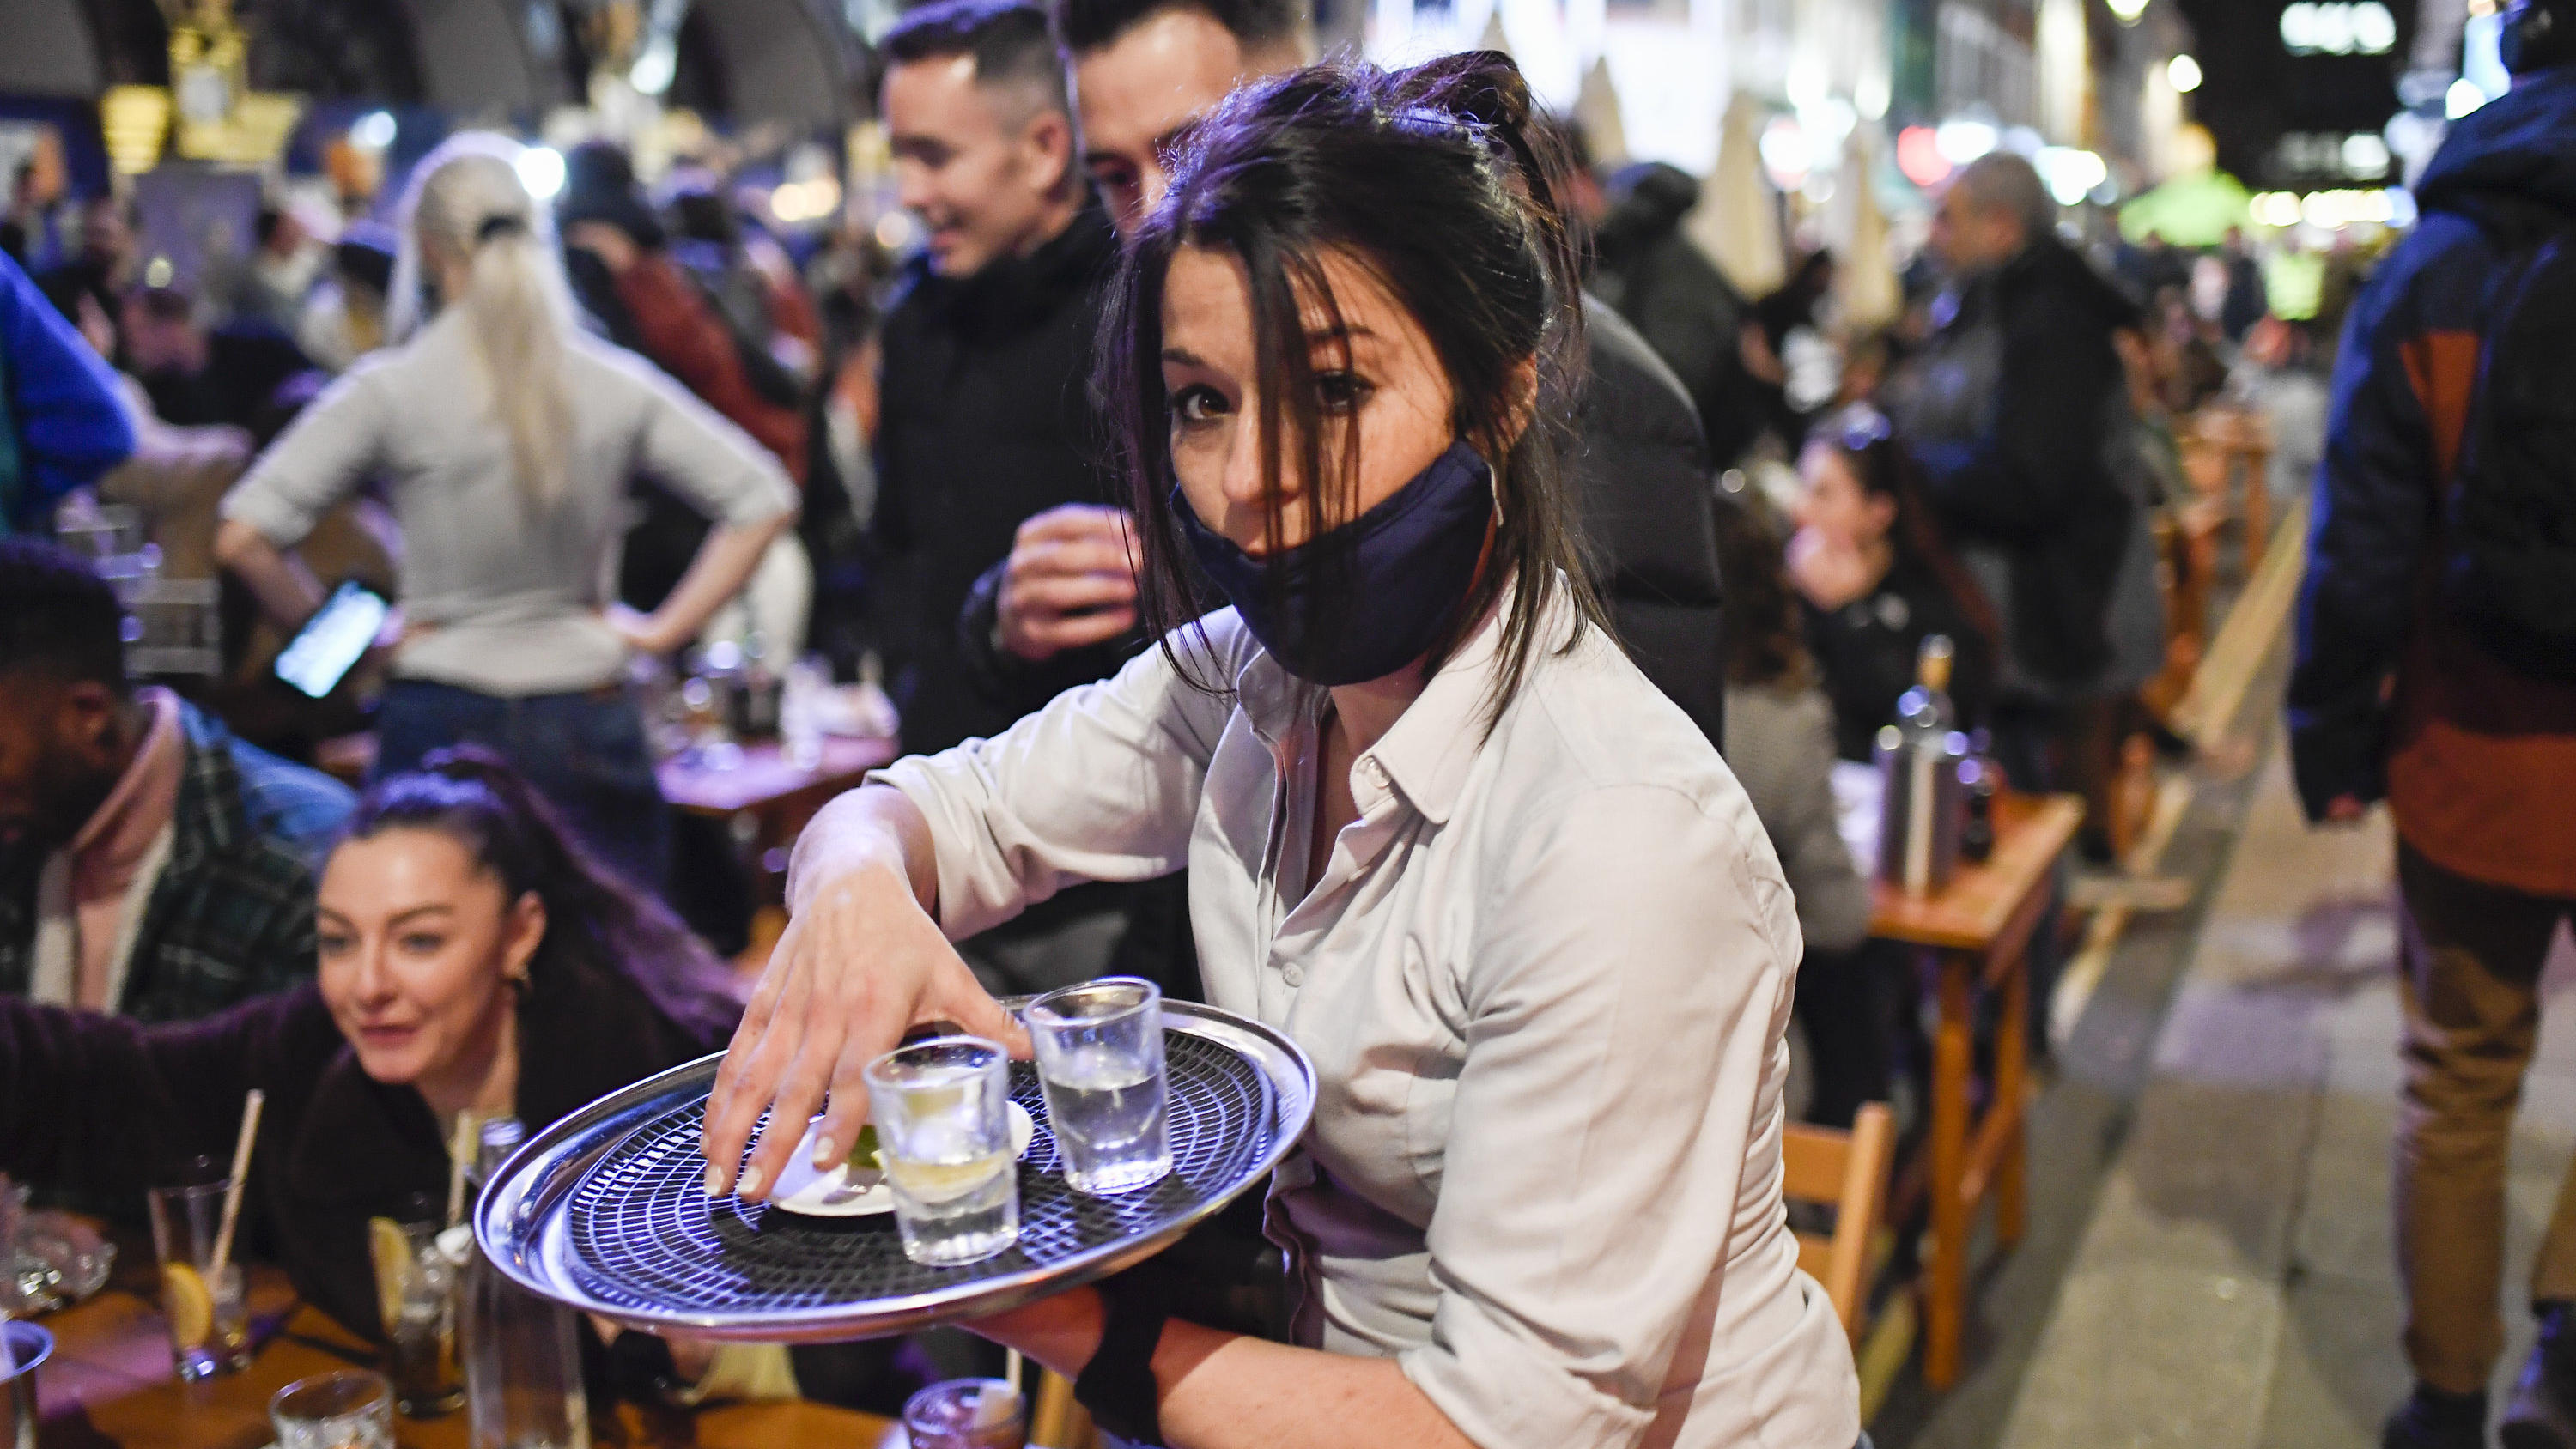 A waitress serves drinks at tables outside a pub in Soho, London, on the day some of England's coronavirus lockdown restrictions were eased by the British government, Monday, April 12, 2021. Pubs, shops and hairdressers have opened as lockdown restri